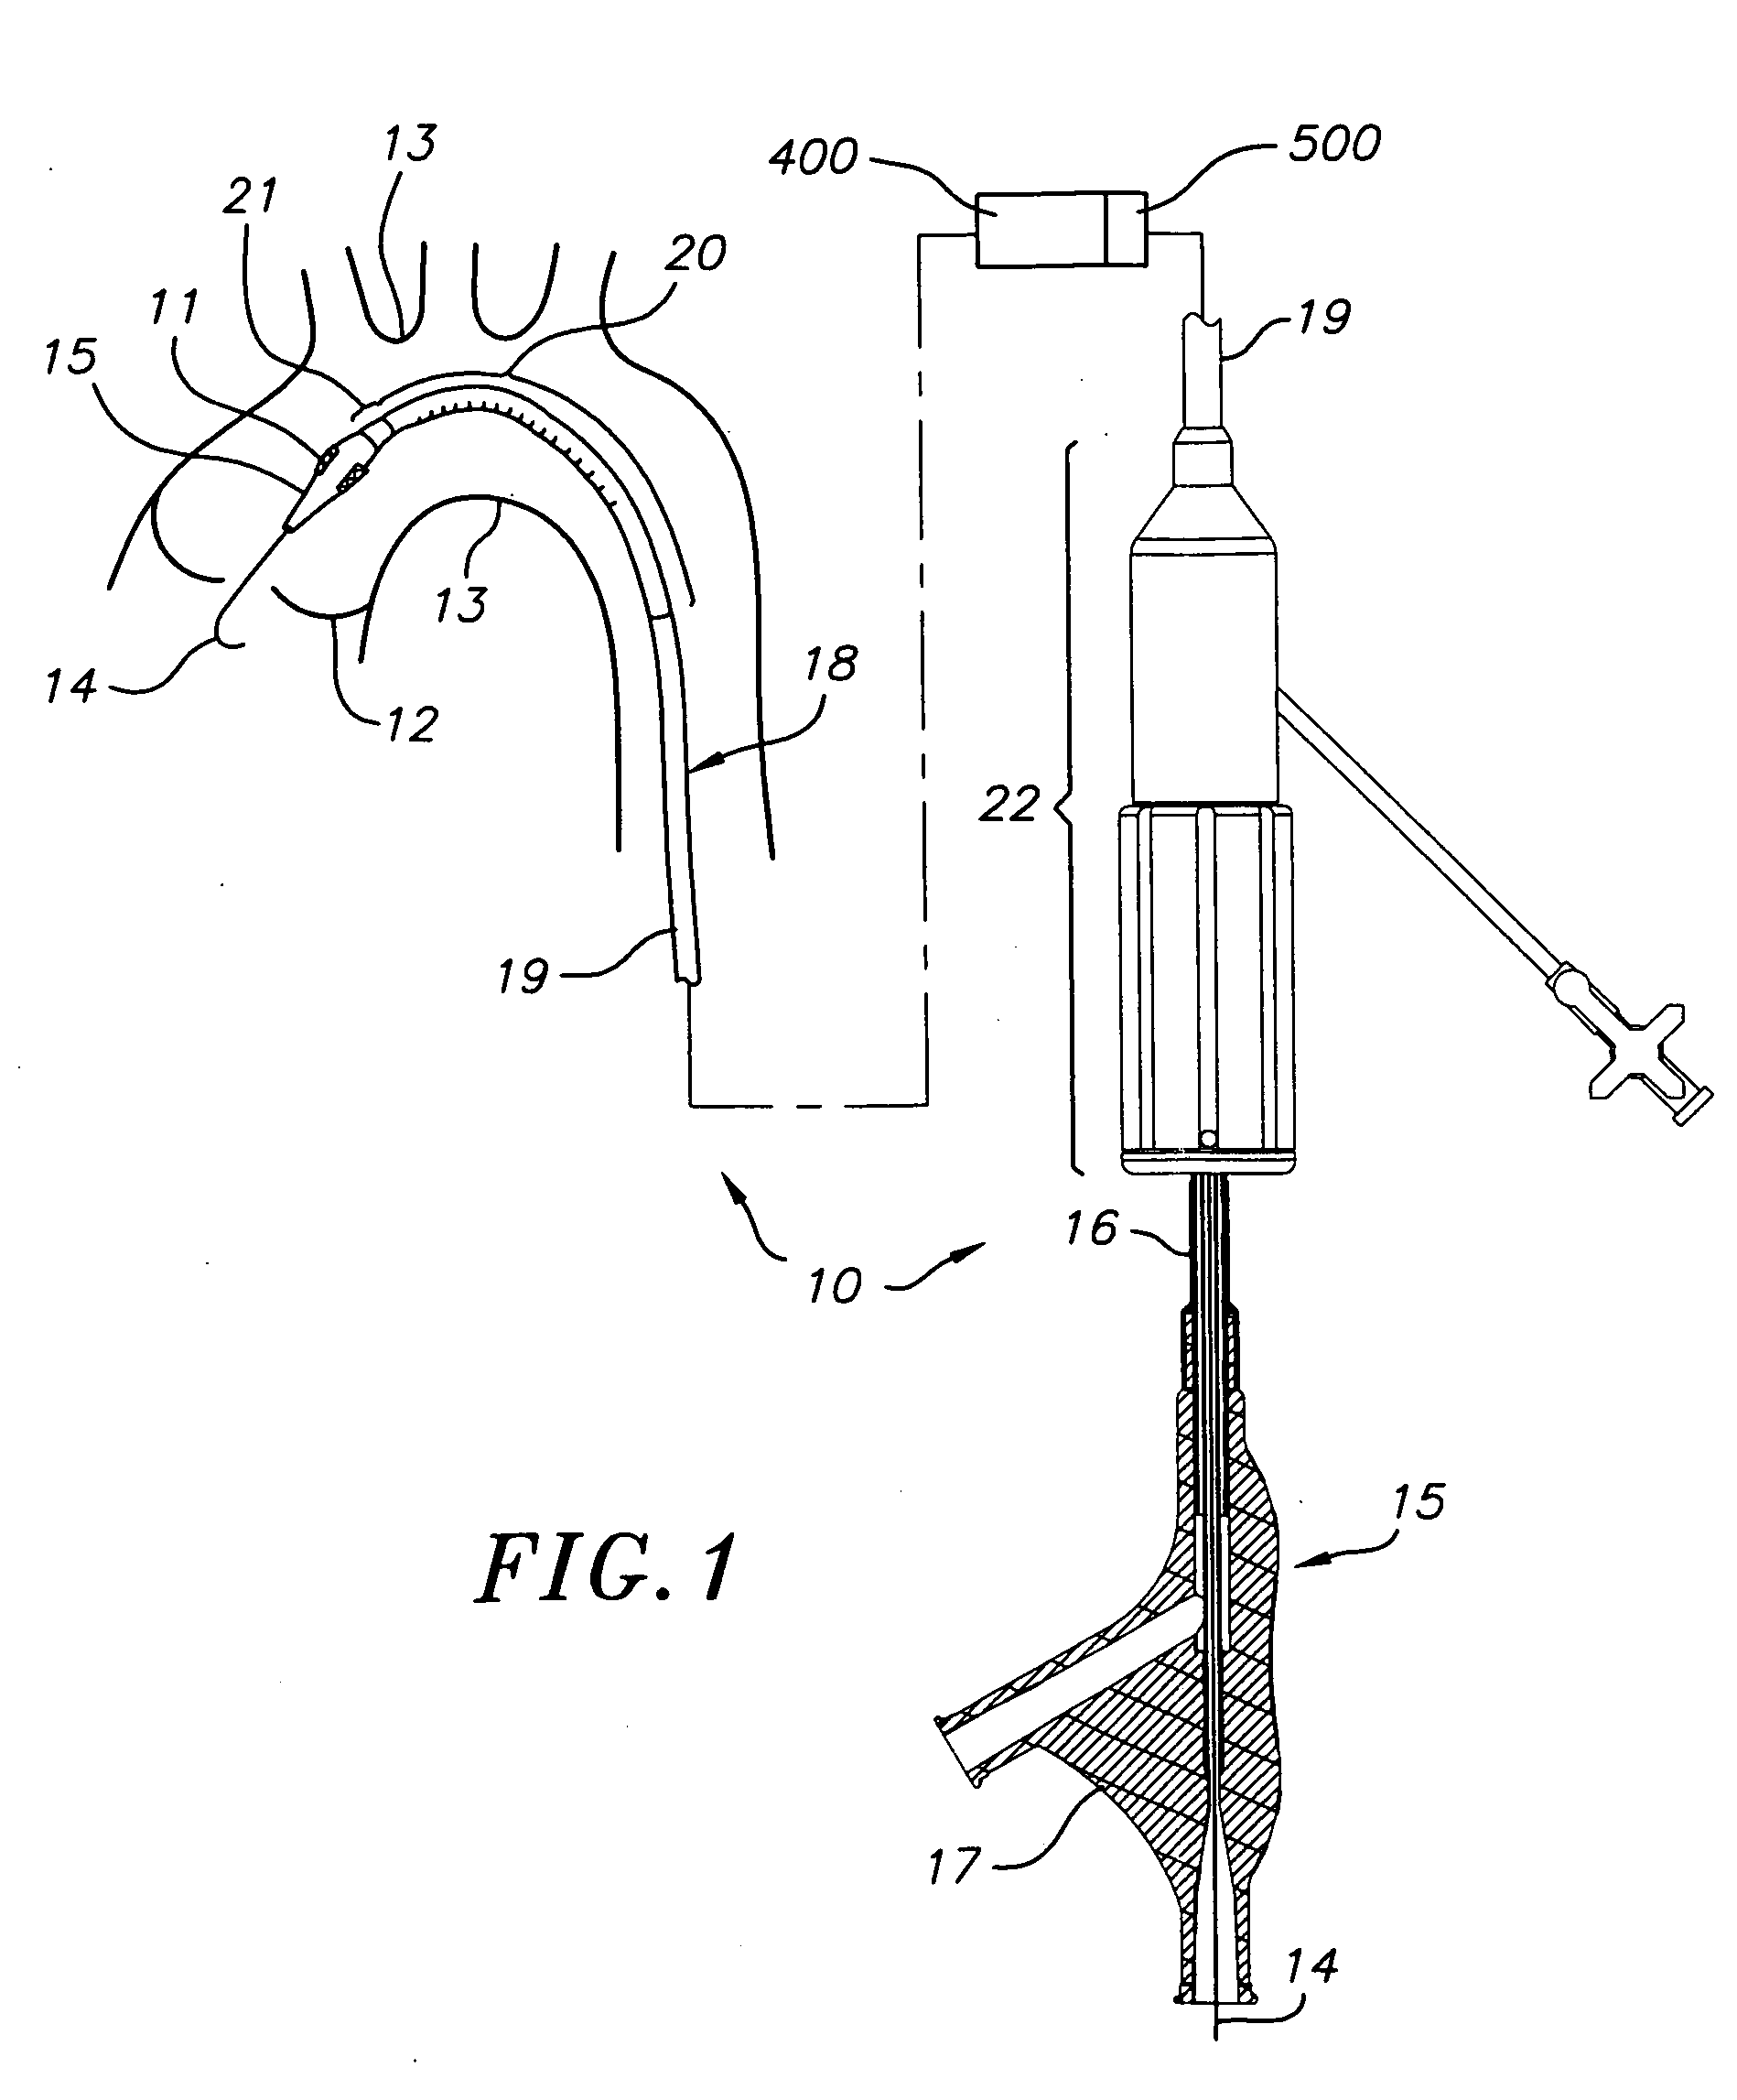 Heart valve delivery system